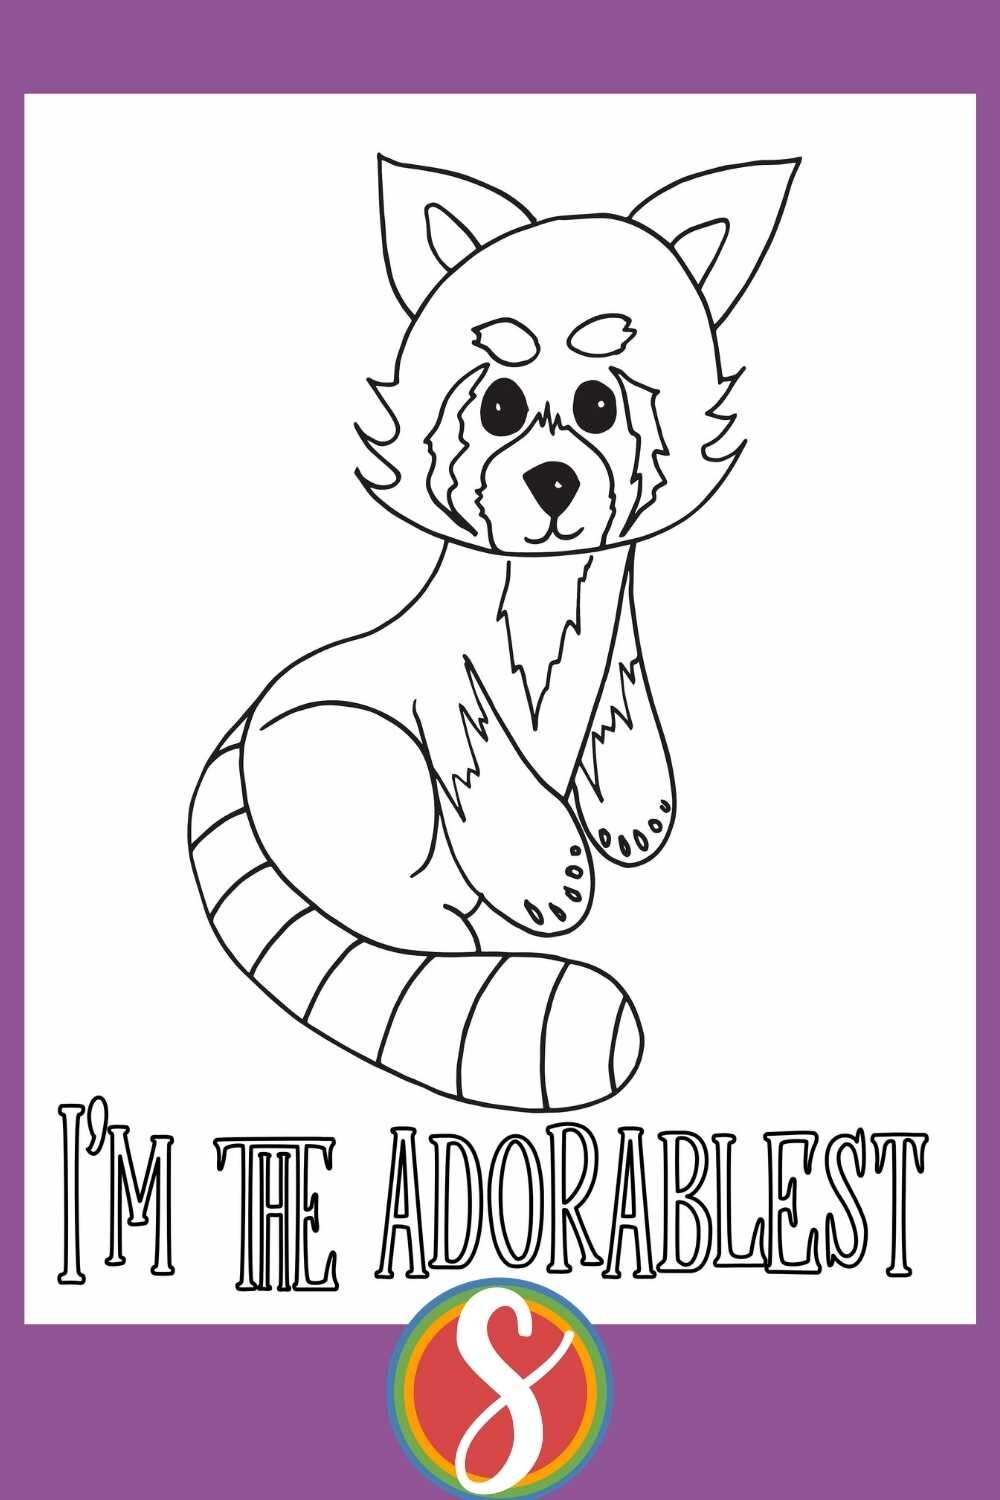 Free printable red panda coloring pages from Stevie Doodles - 4 free sheets with red pandas to print and color